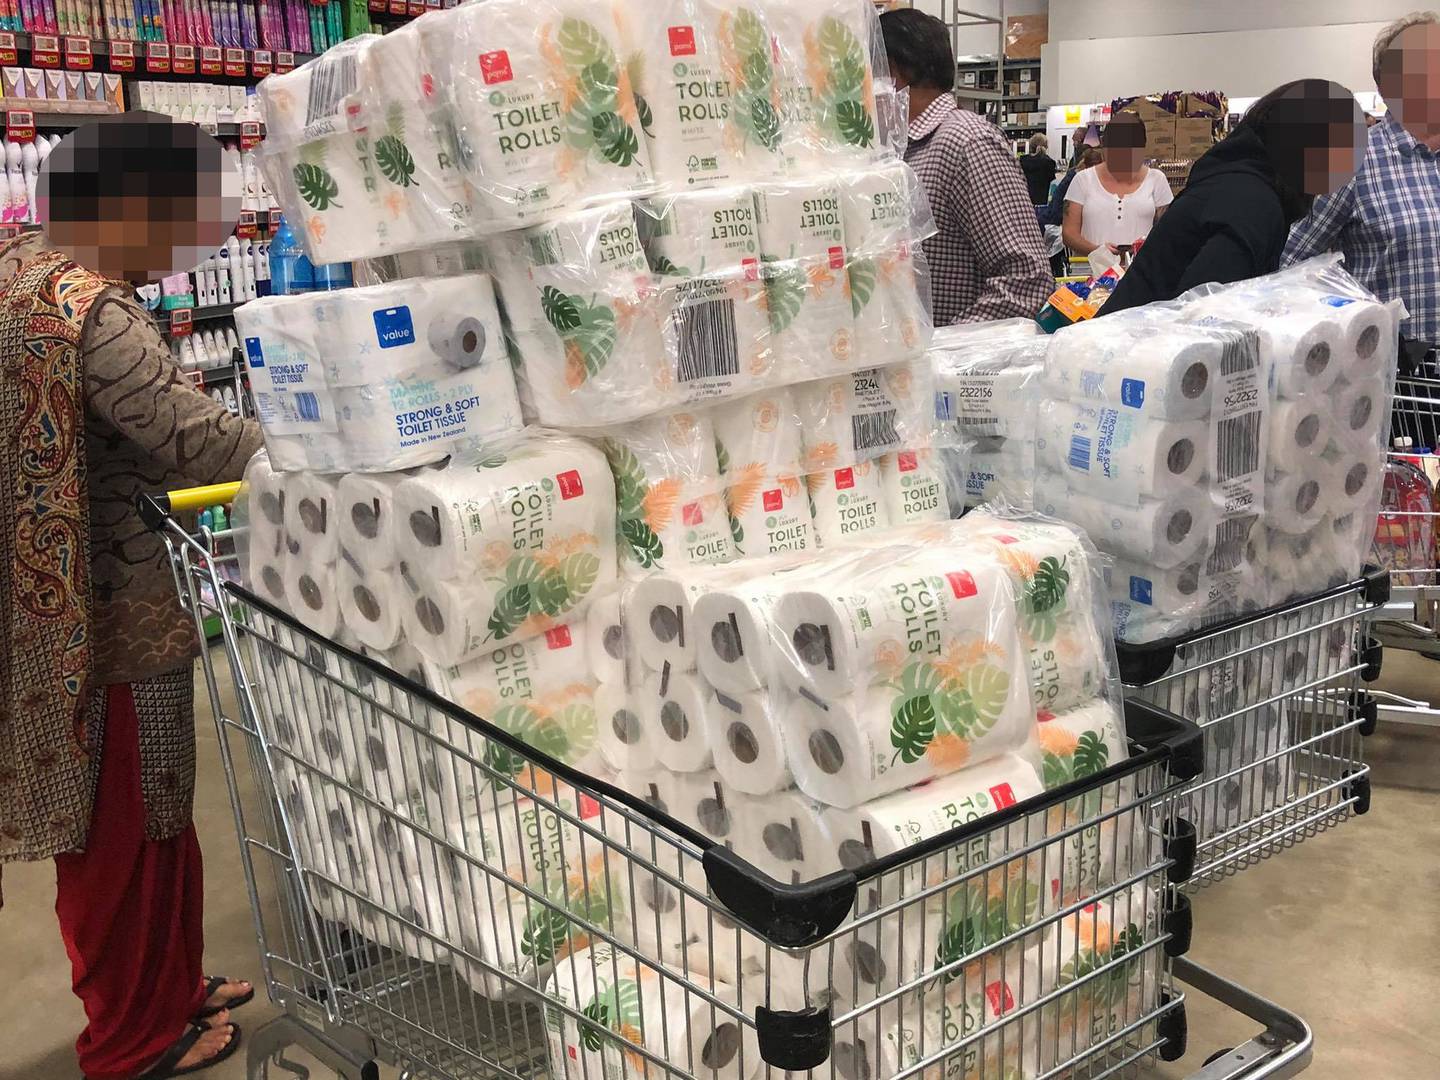 Shoppers in Pukekohe this morning had their trolleys stacked high with toilet paper. Photo: Shaun...